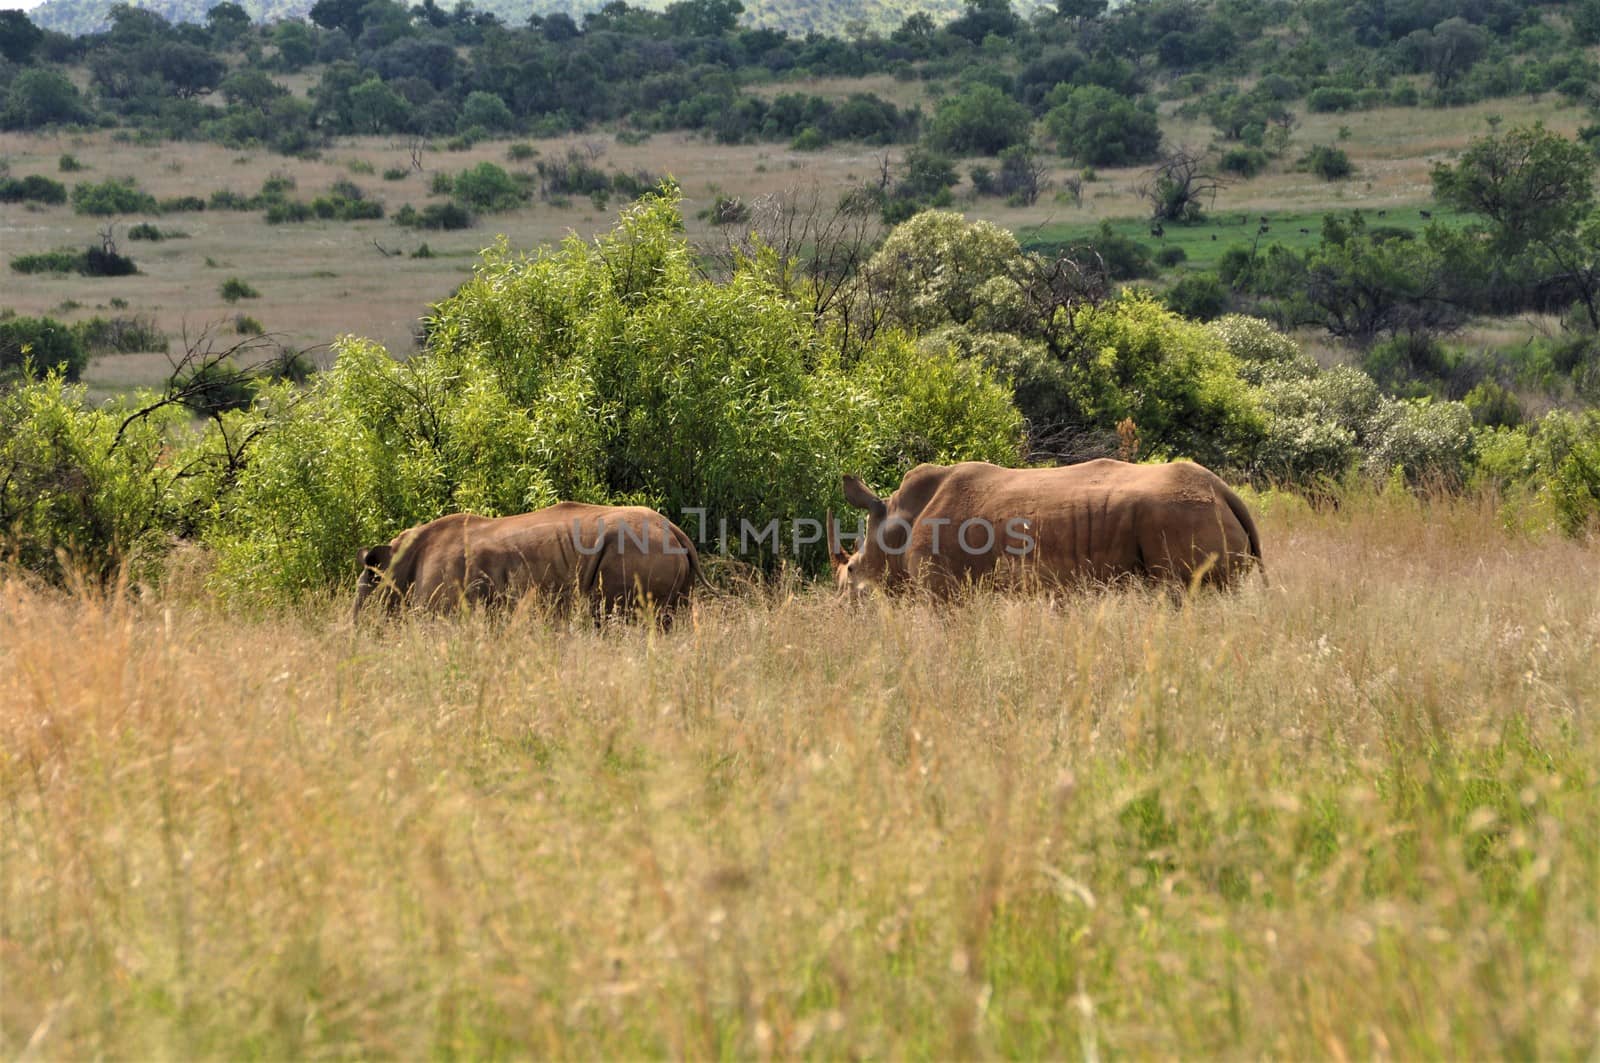 Two white rhinos standing in the savannah in front of some trees